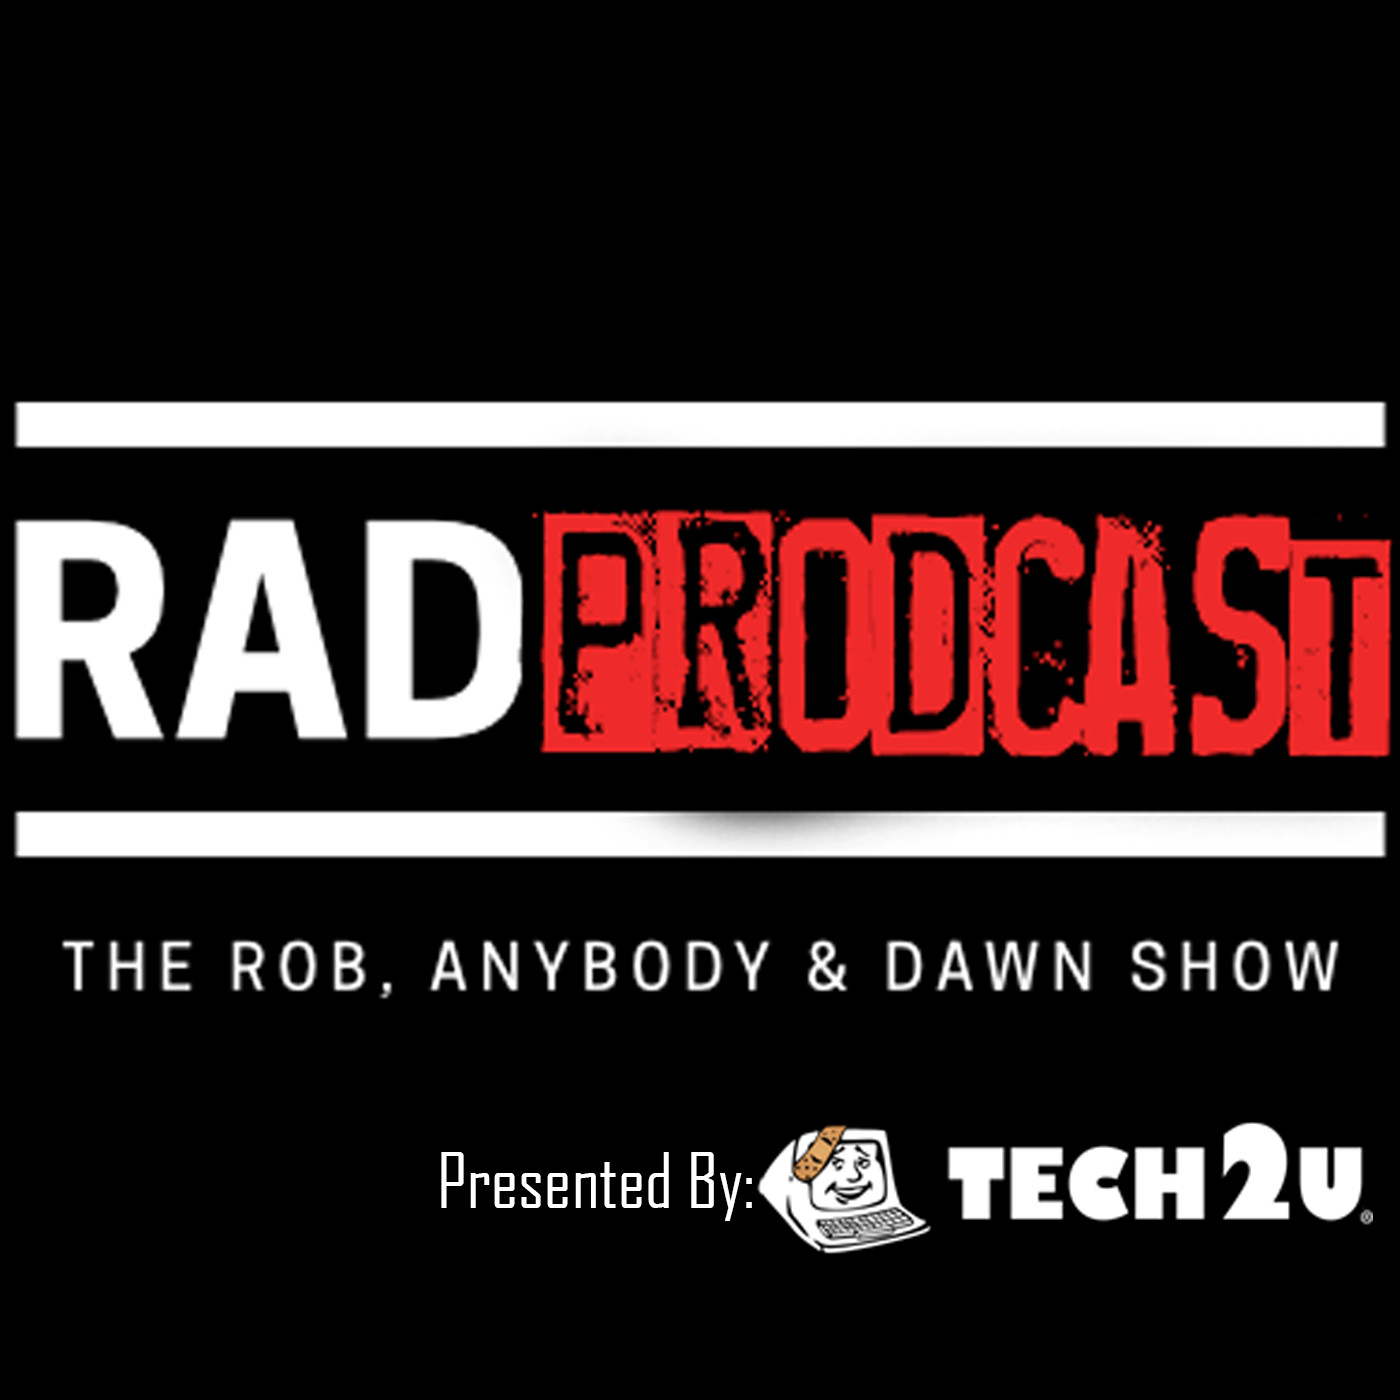 Episode 178 - The RAD Kidsgiving - A Holiday Prodcast